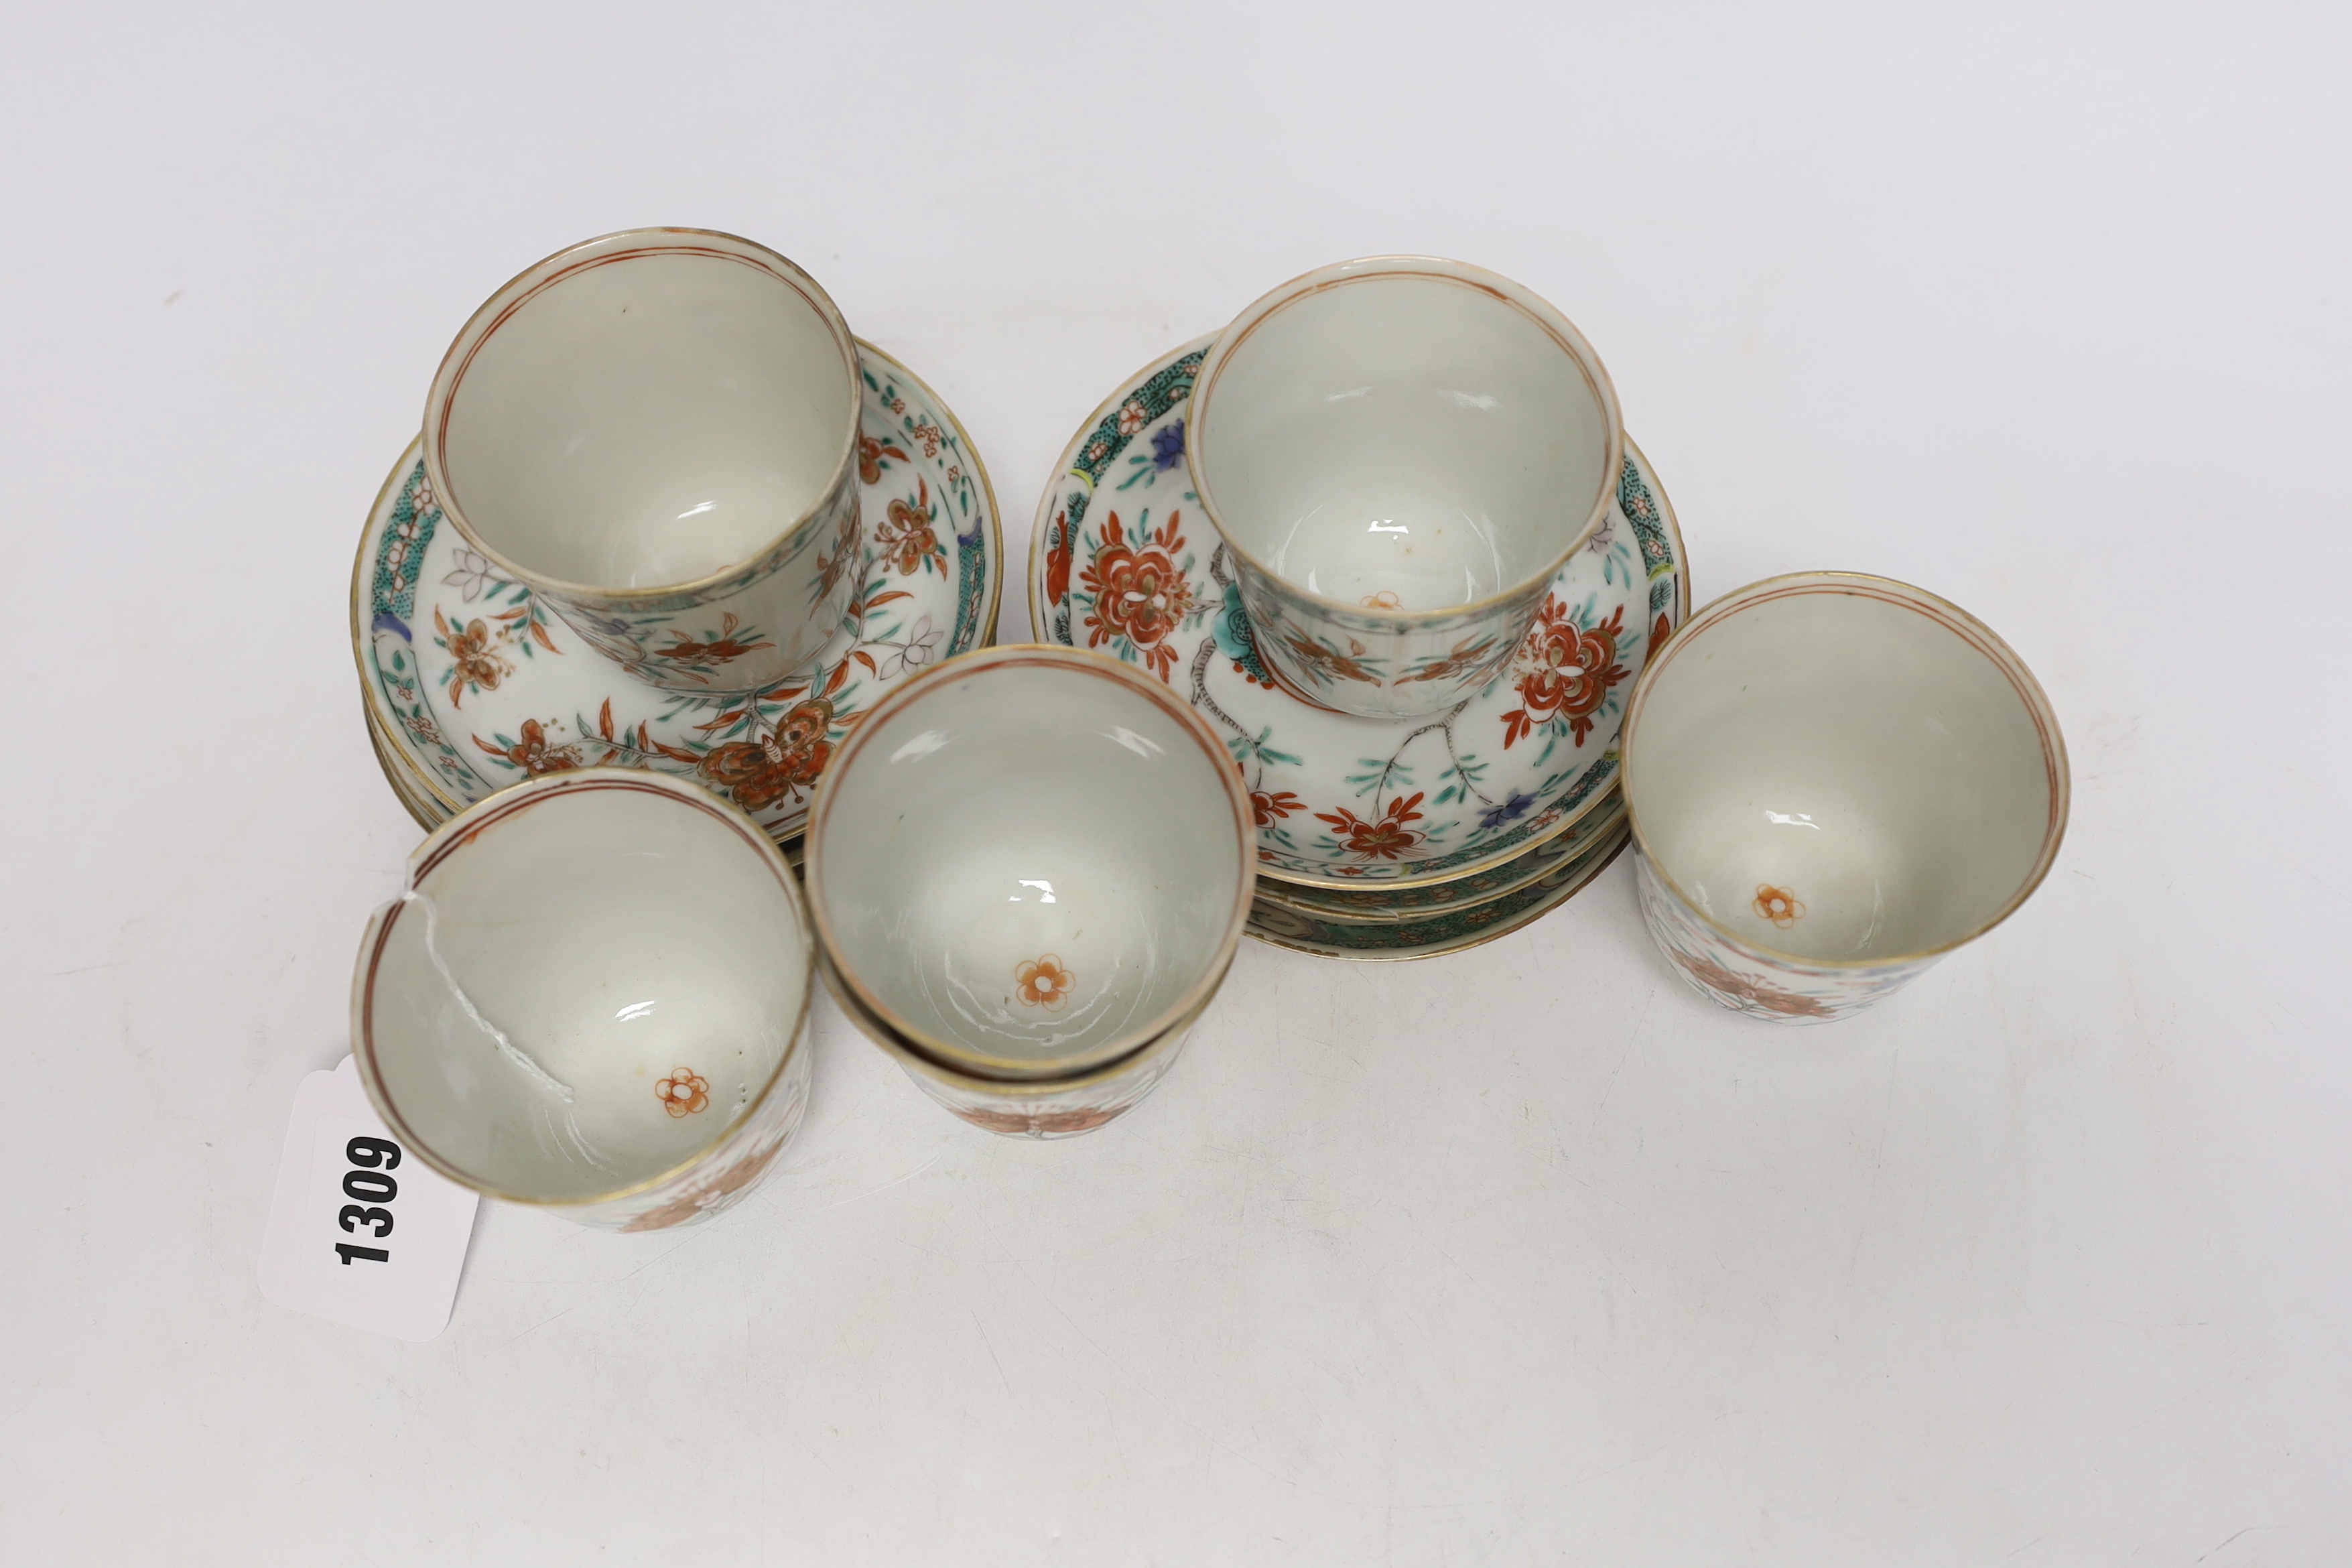 A set of six early 18th century Chinese cups and saucers with Dutch enamelled decoration, c.1710, 7.5cm high